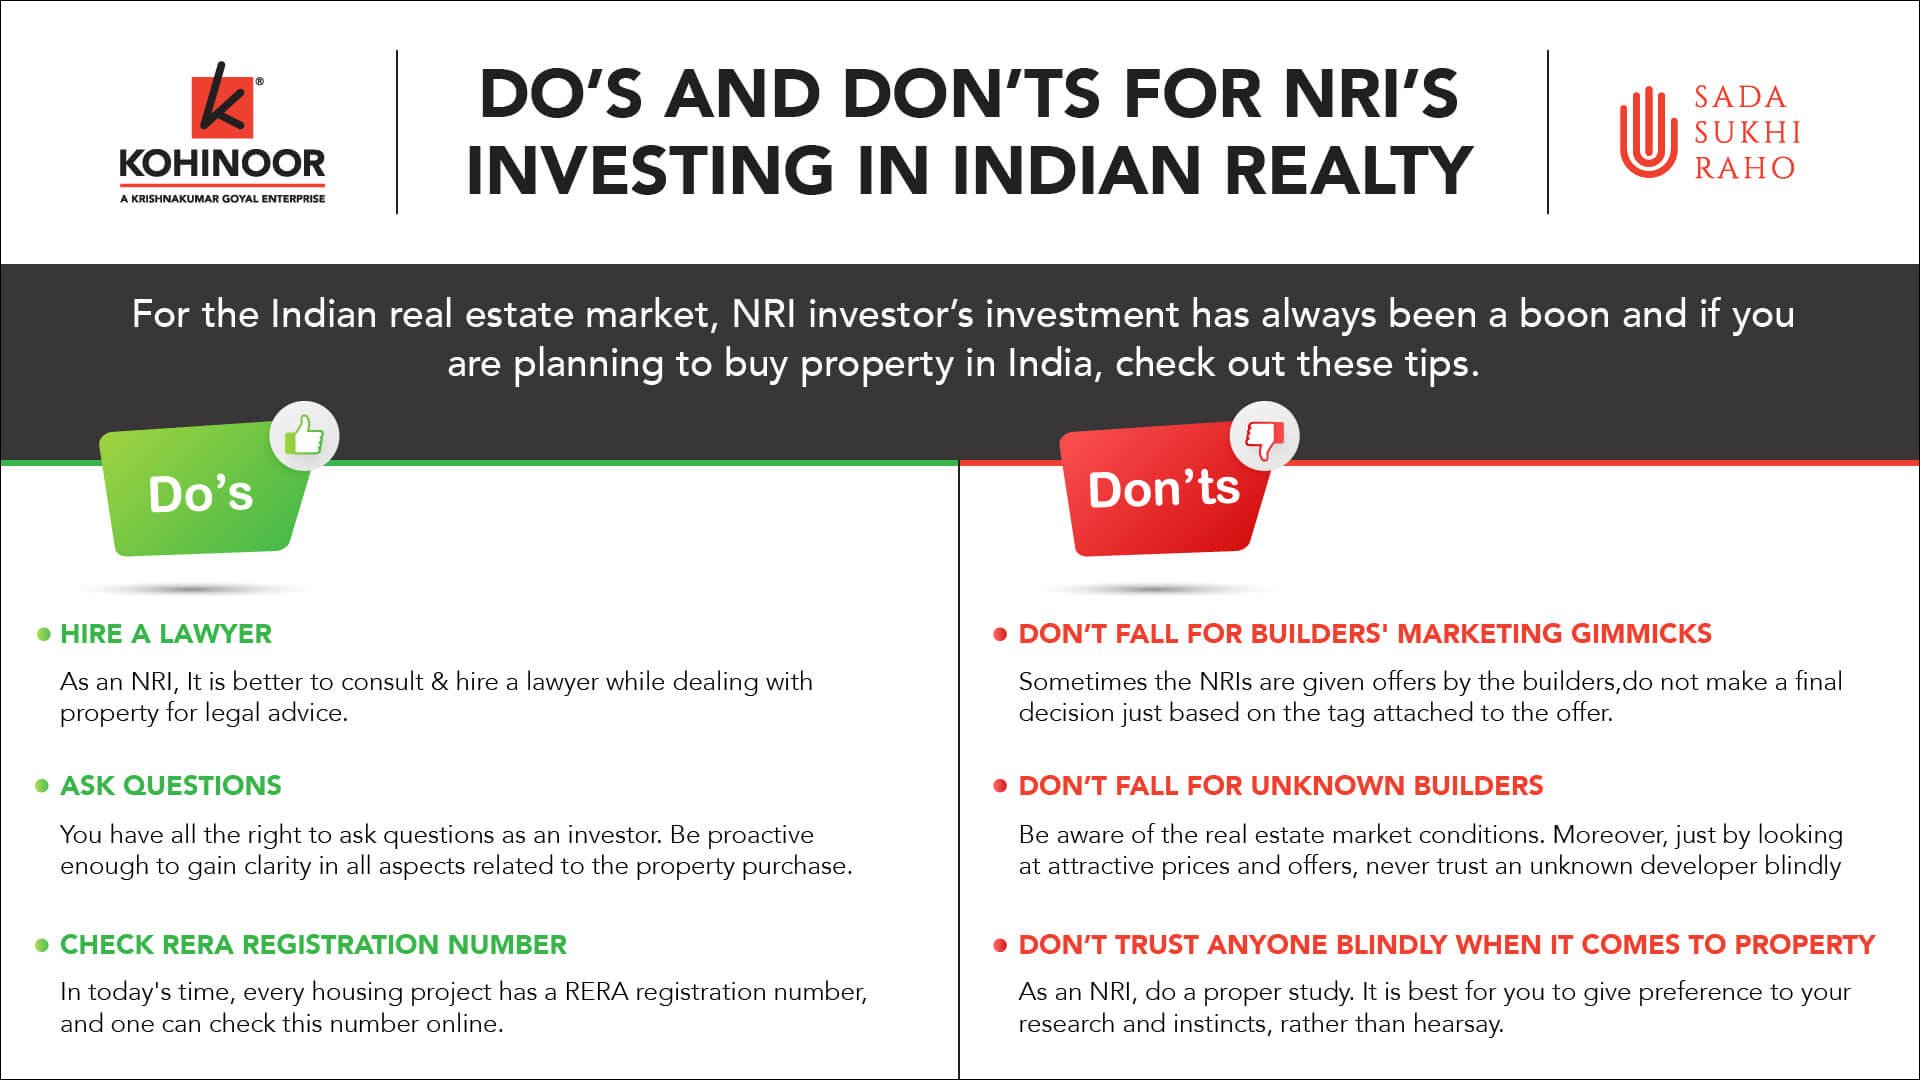 Kohinoor_Dos and don’ts for NRI’s investing in Indian realty_Infographic-1